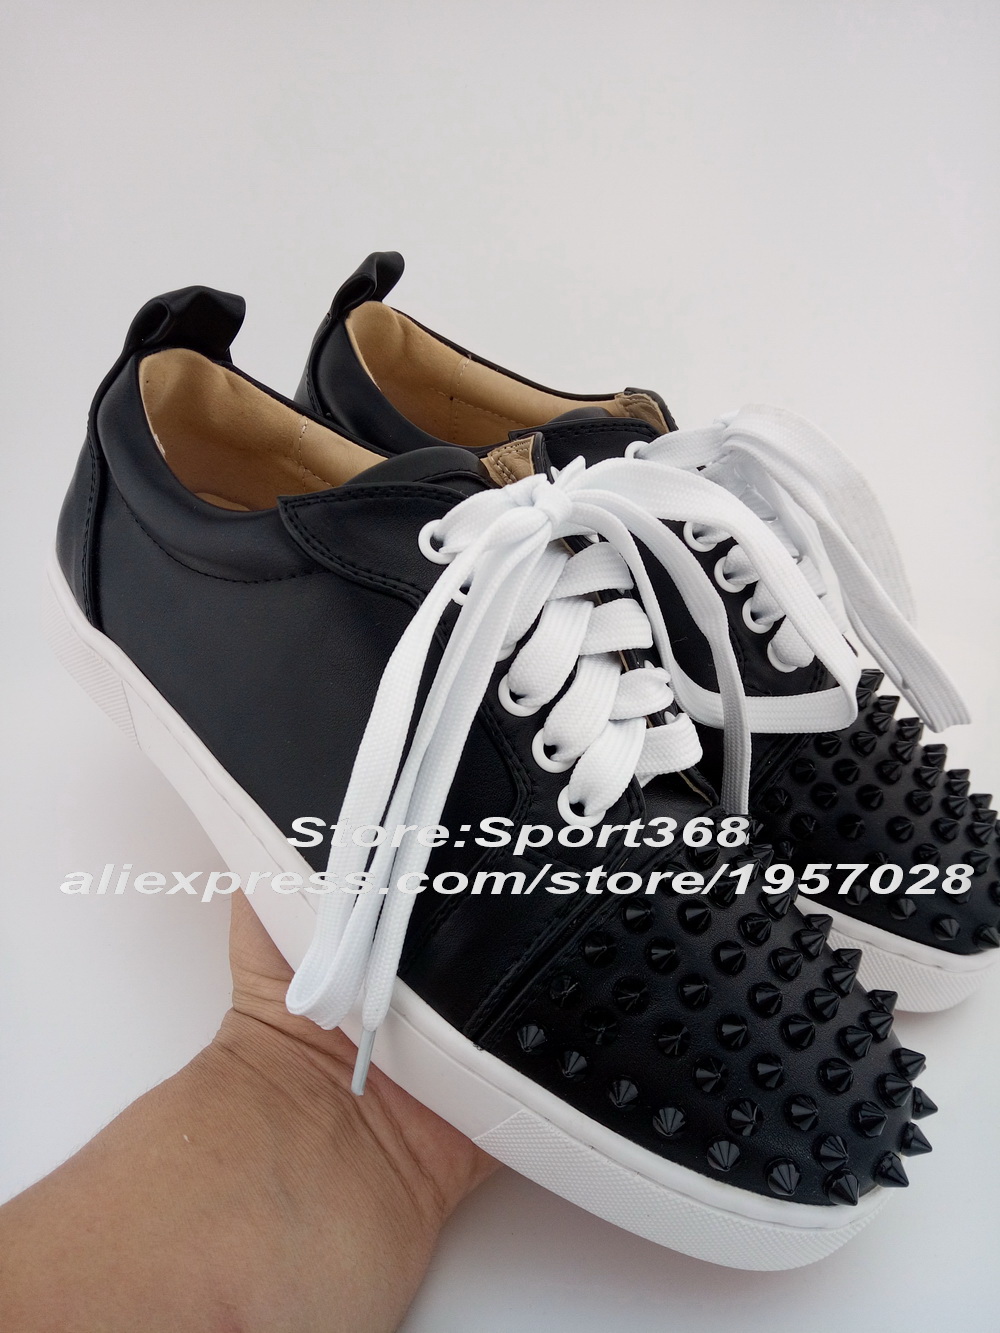 Compare Prices on White Sneakers Designer Woman- Online Shopping ...